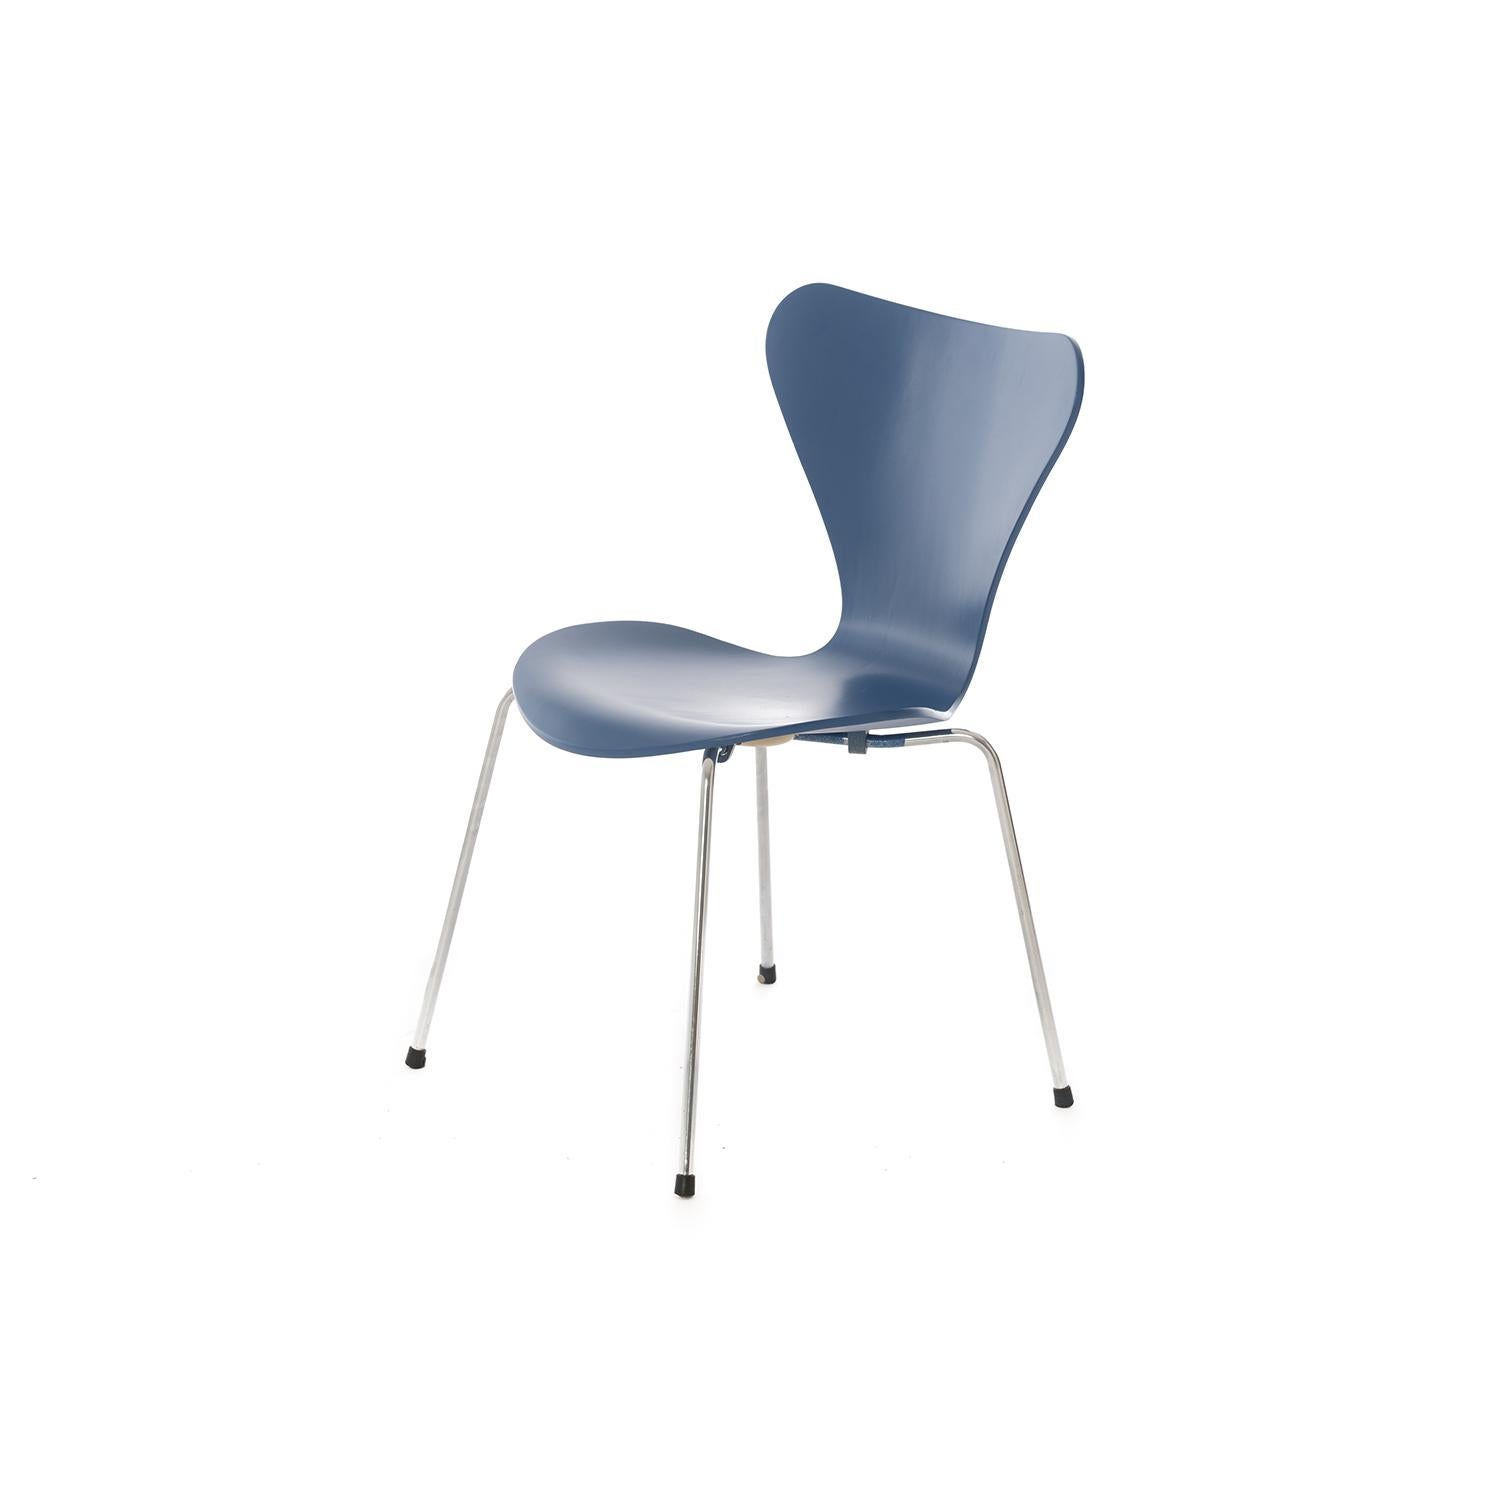 This set of 4 original Series 7 chairs by Arne Jacobsen for Fritz Hansen, with a custom finish in a very agreeable shade of blue. The Series 7 chair was the first chair designed for international distribution and the bestselling chair of all